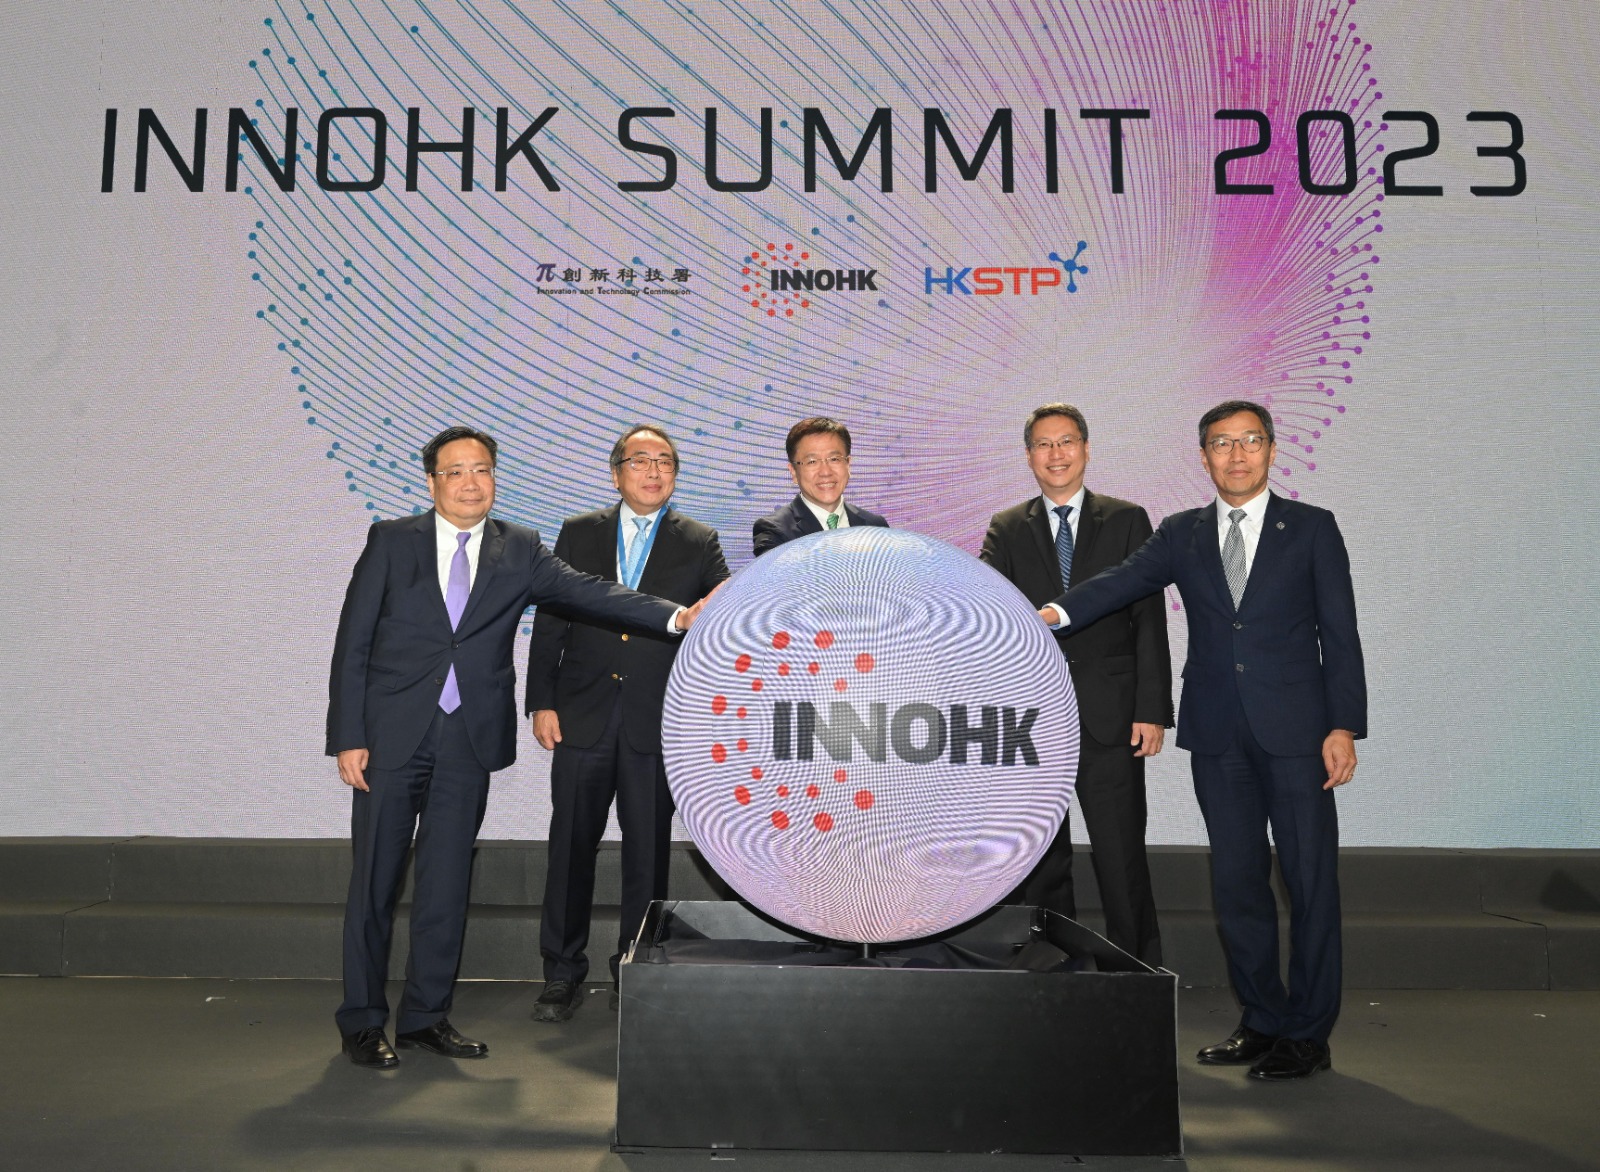 Organised by the Innovation and Technology Commission and the Hong Kong Science and Technology Parks Corporation (HKSTPC), the InnoHK Summit 2023 was held in Hong Kong Science Park today (December 6). Photo shows Secretary for Innovation, Technology and Industry, Professor Sun Dong (centre); the Chairman of the InnoHK Steering Committee, Professor Tsui Lap-chee (second left); the Permanent Secretary for Innovation, Technology and Industry, Mr Eddie Mak (second right); the Commissioner for Innovation and Technology, Mr Ivan Lee (first left); and the Chief Executive Officer of the HKSTPC, Mr Albert Wong (first right), officiating at the opening ceremony.